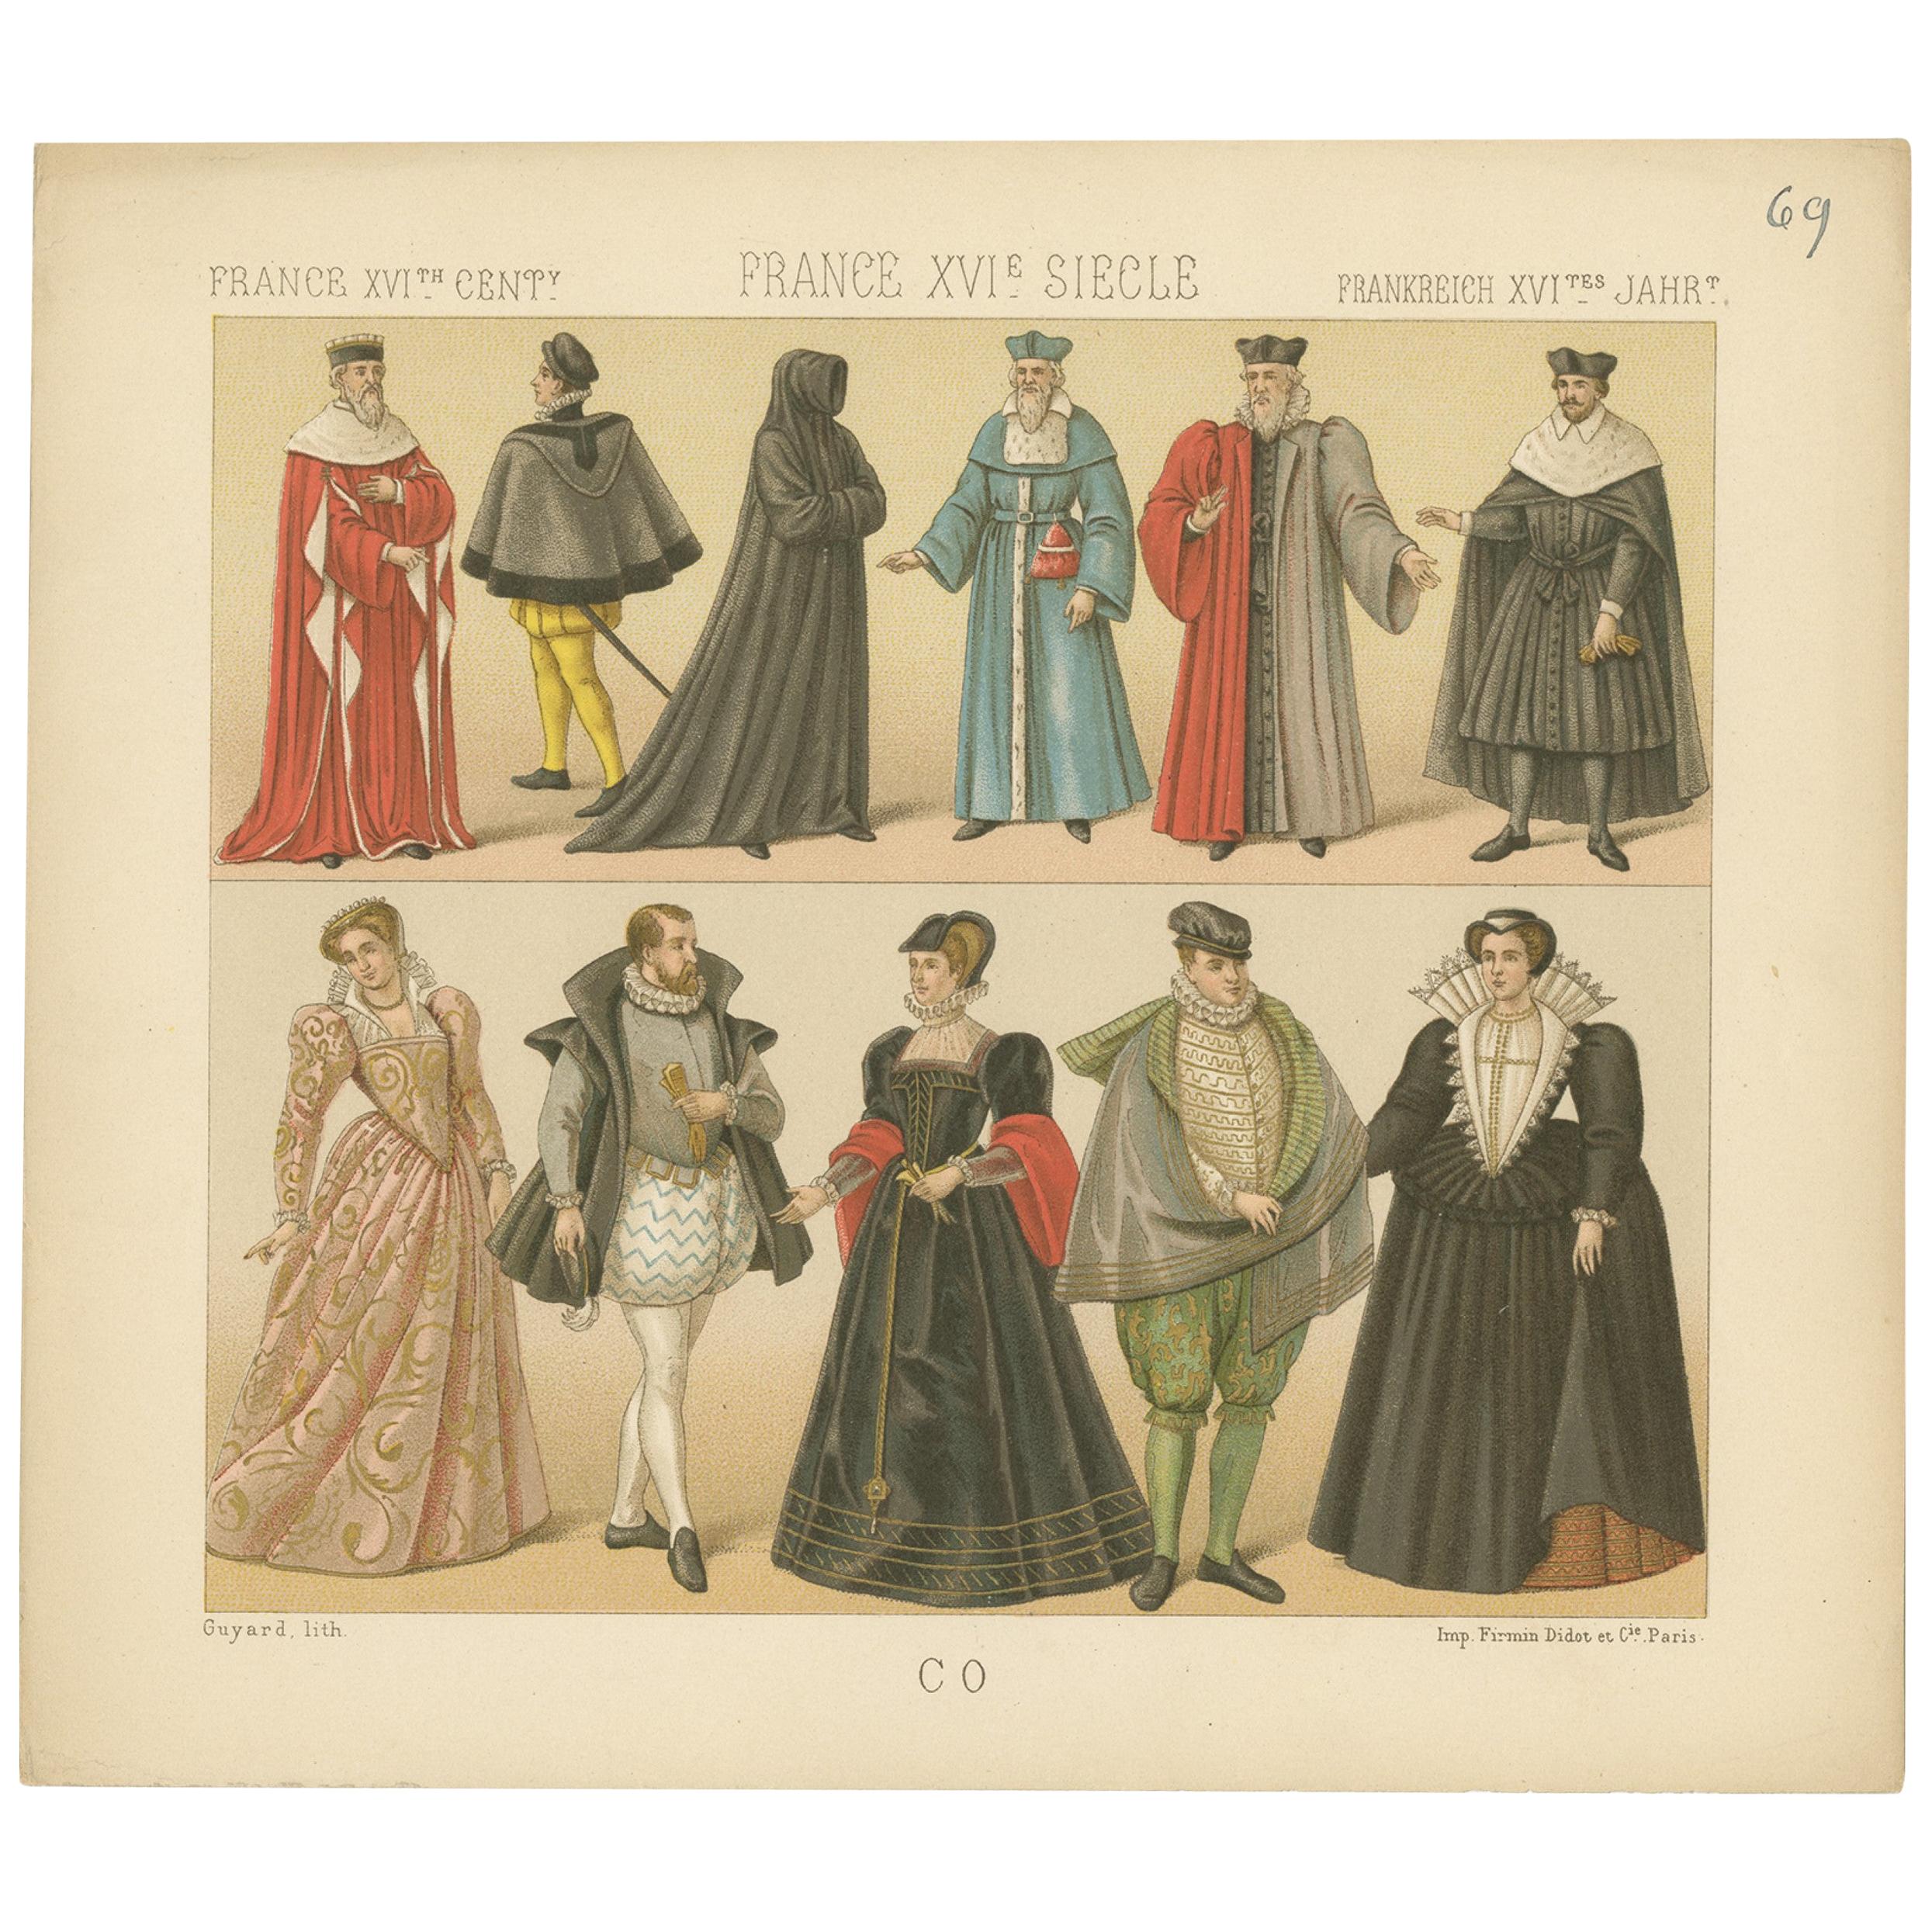 Pl. 69 Antique Print of French XVIth Century Costumes by Racinet, circa 1880